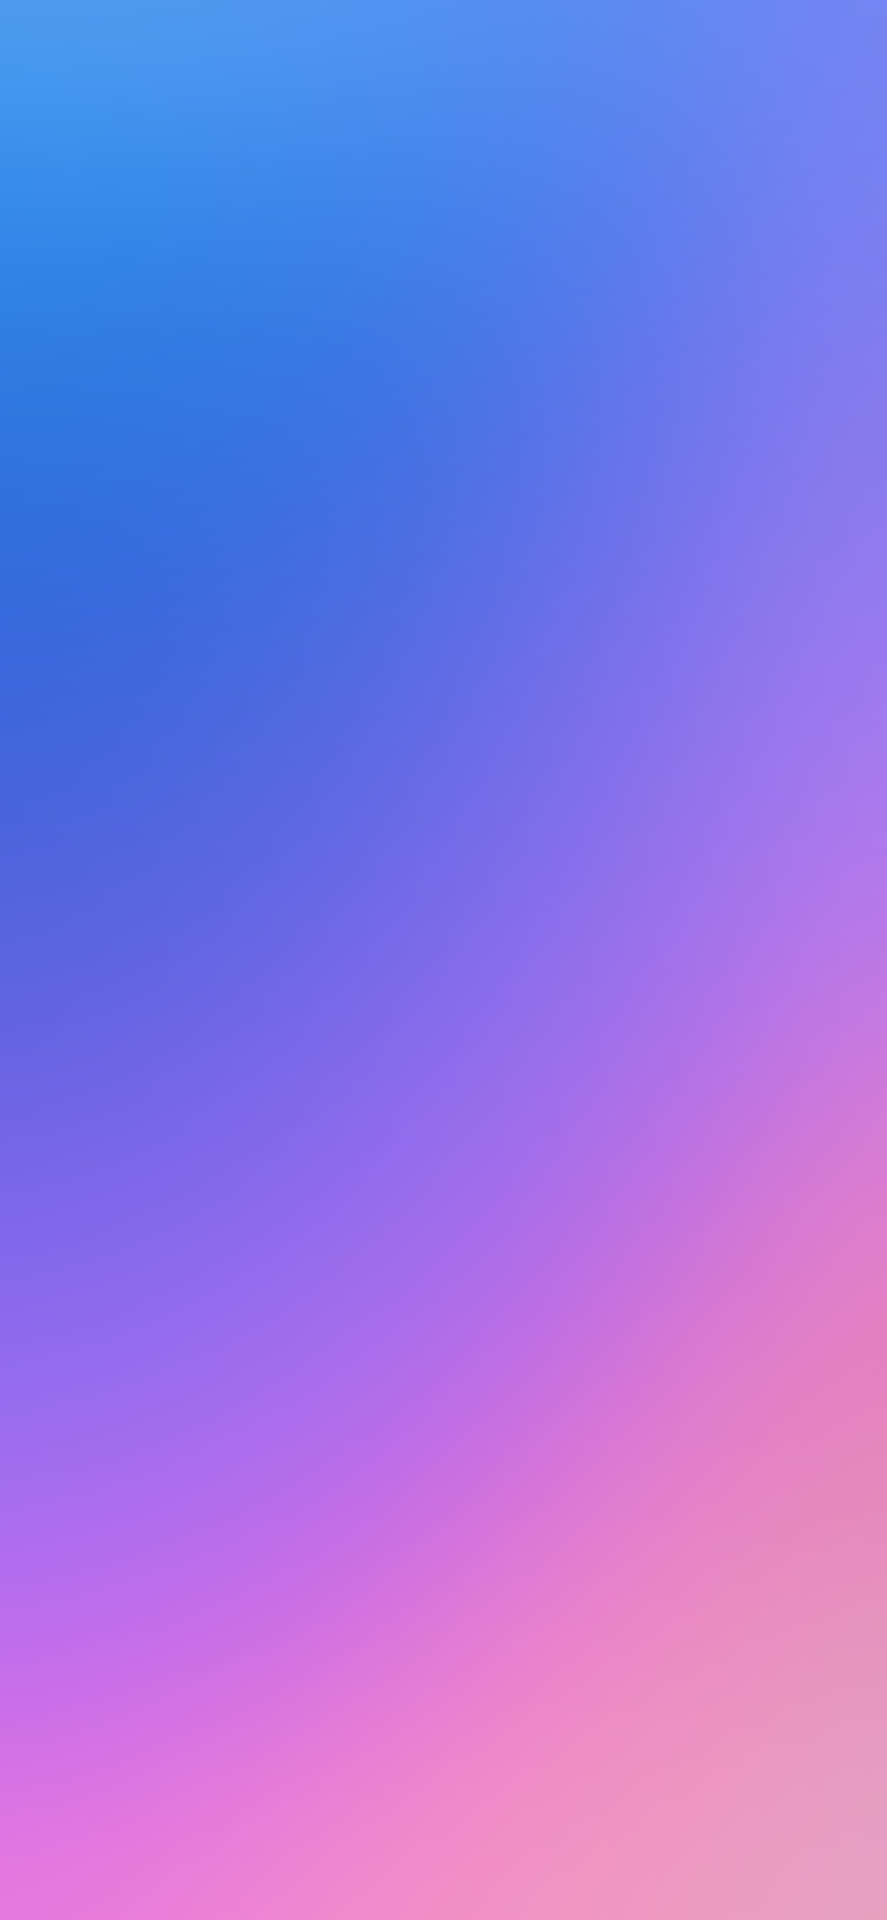 Multicolor gradient wallpapers pack for iPhone